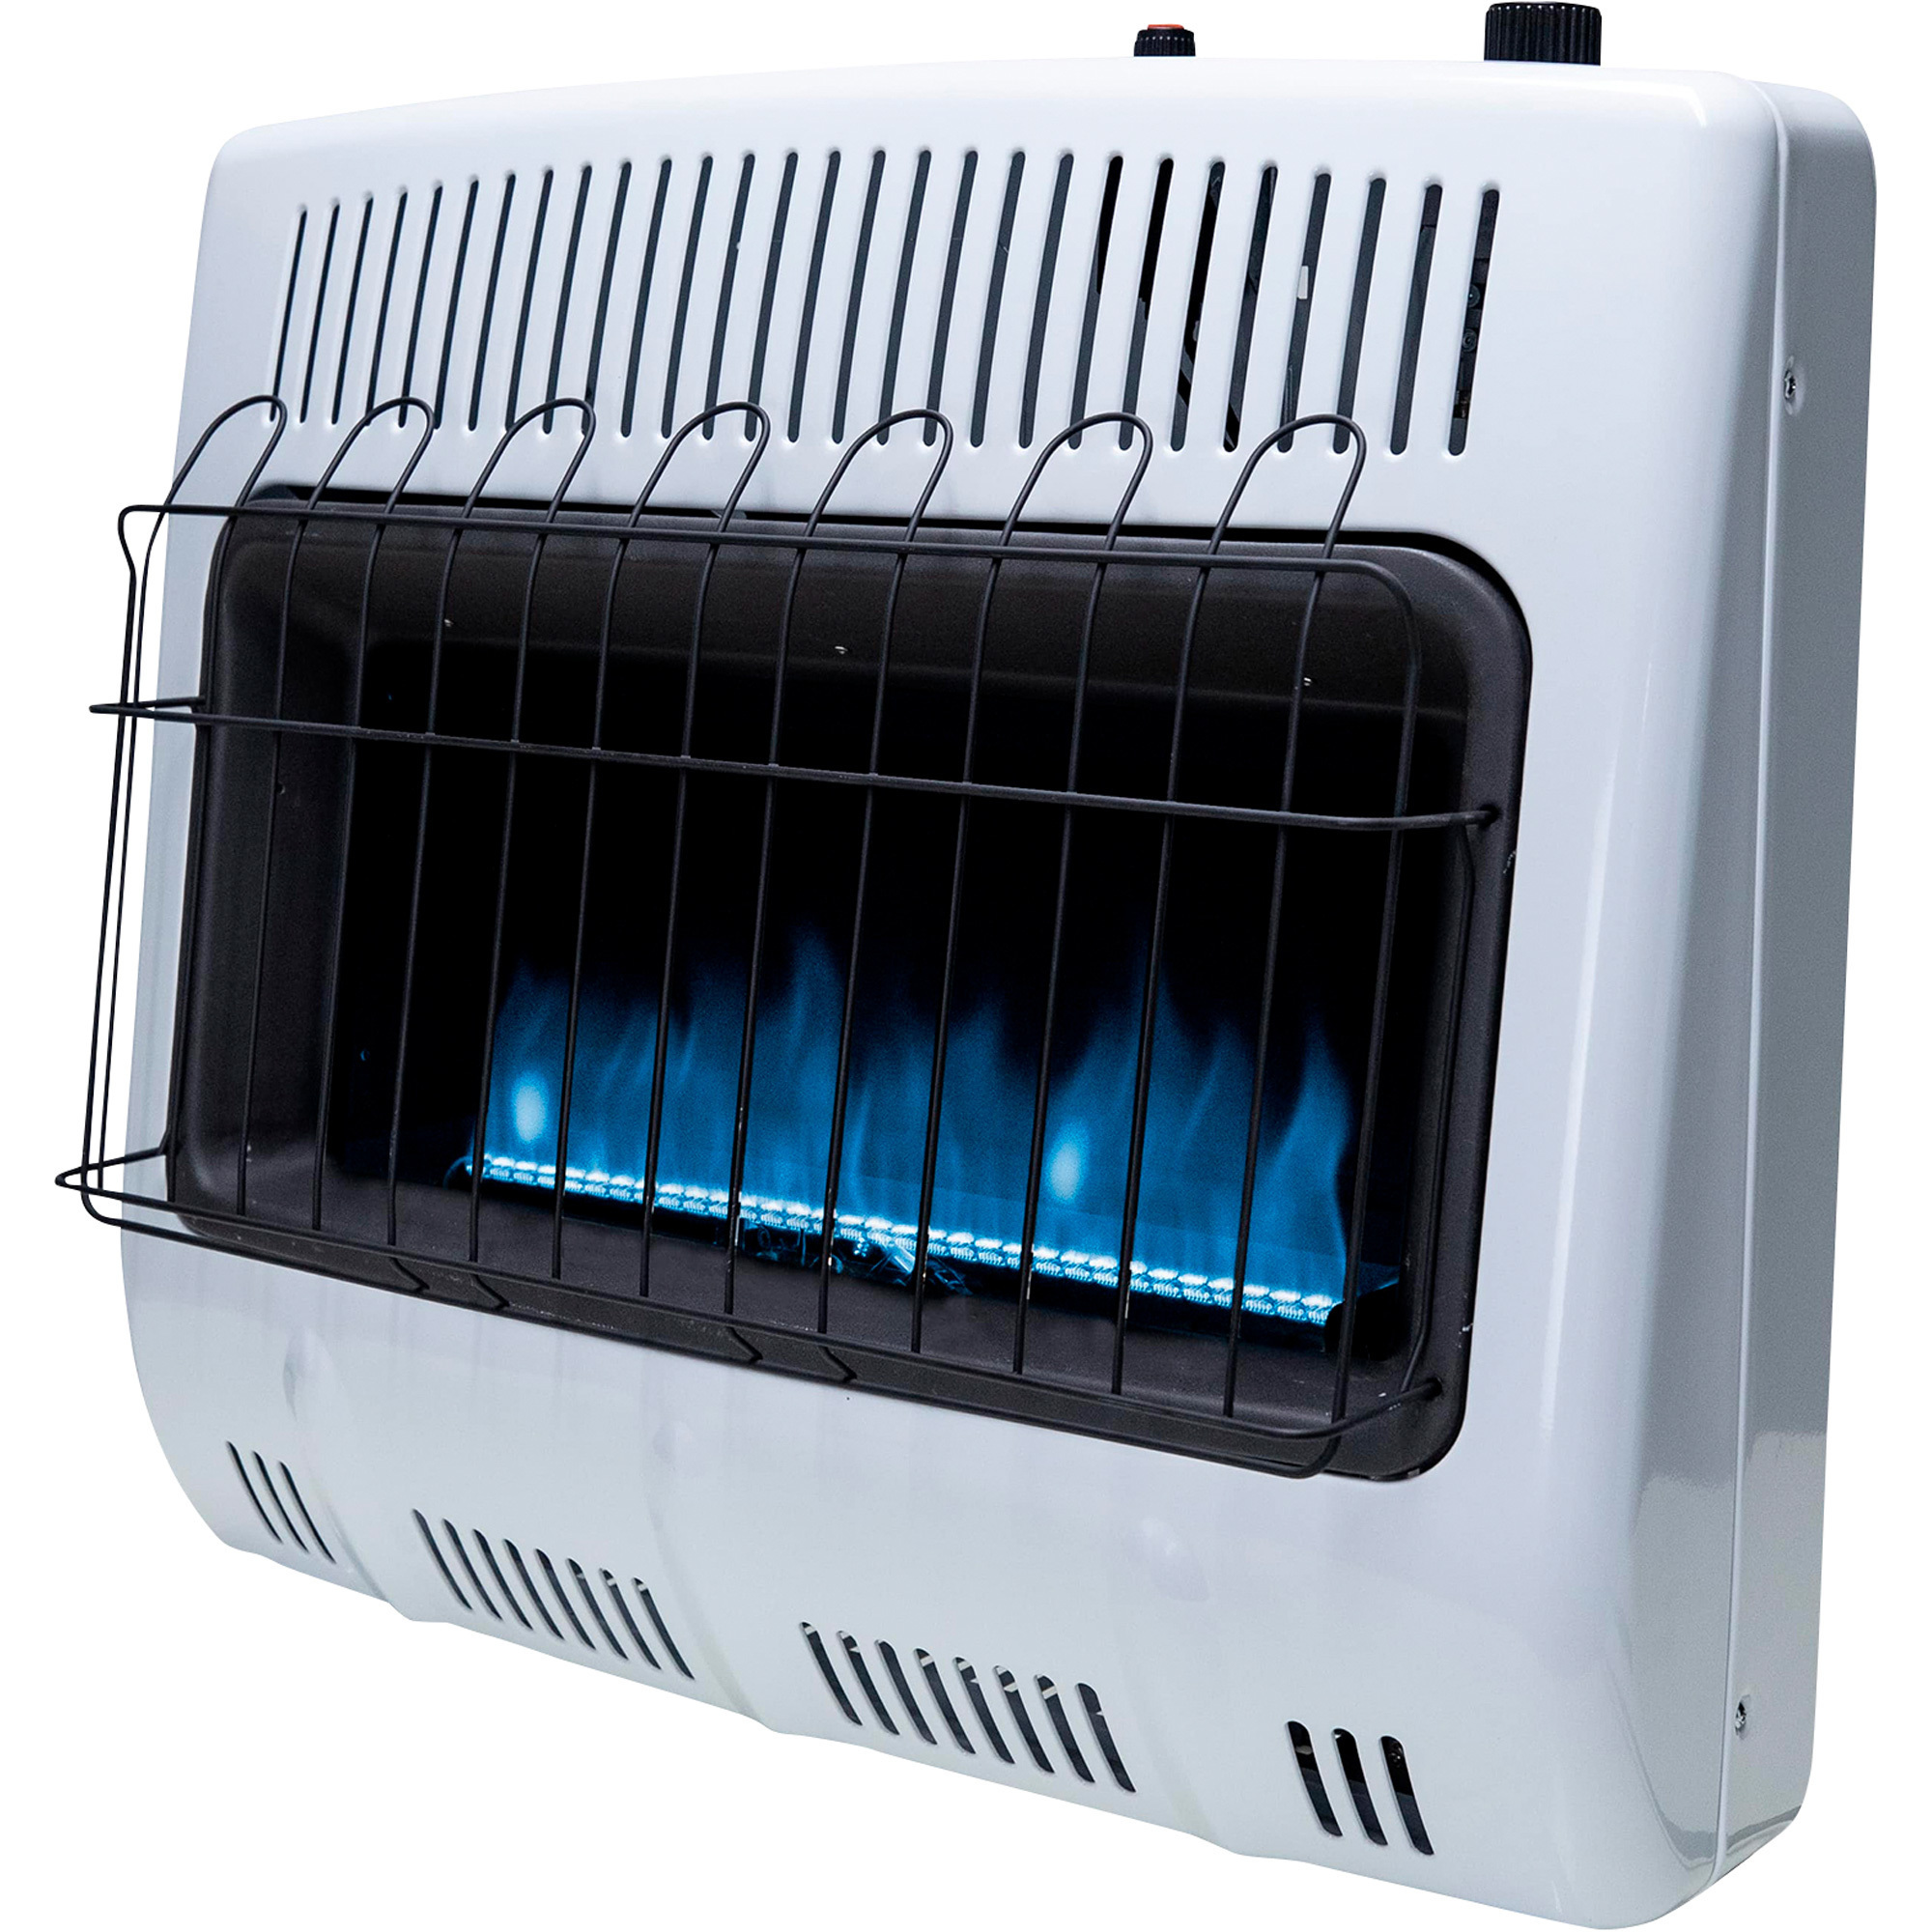 Mr. Heater Natural Gas Vent-Free Blue Flame Wall Heater, 30,000 BTU, Model MHVFB30NGT